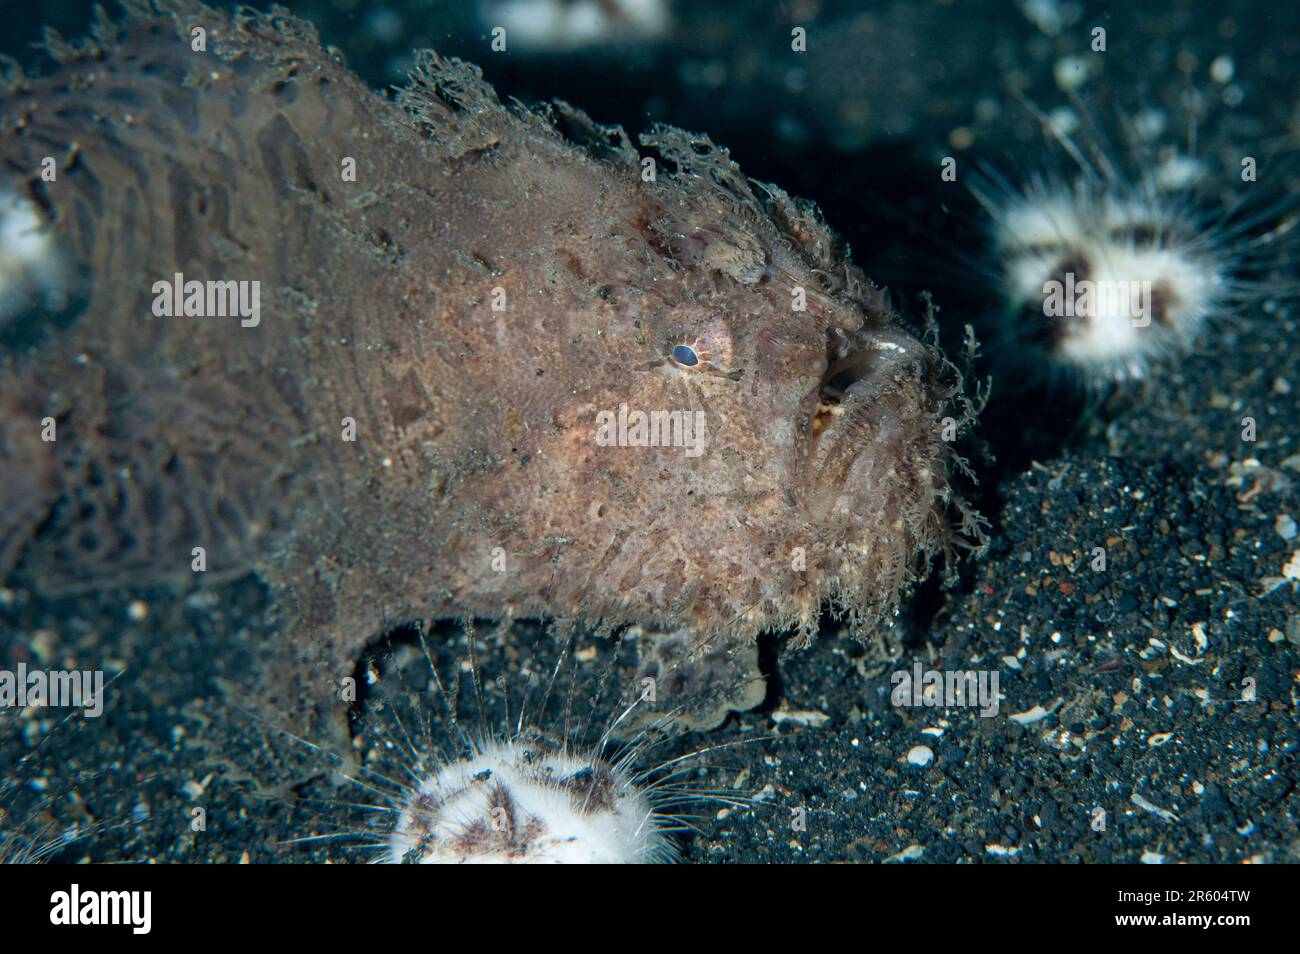 Striped Frogfish, Antennarius striatus, with Hearth Heart Urchins, Maretia planulata, on sand, Hairball dive site, Lembeh Straits, Sulawesi, Indonesia Stock Photo